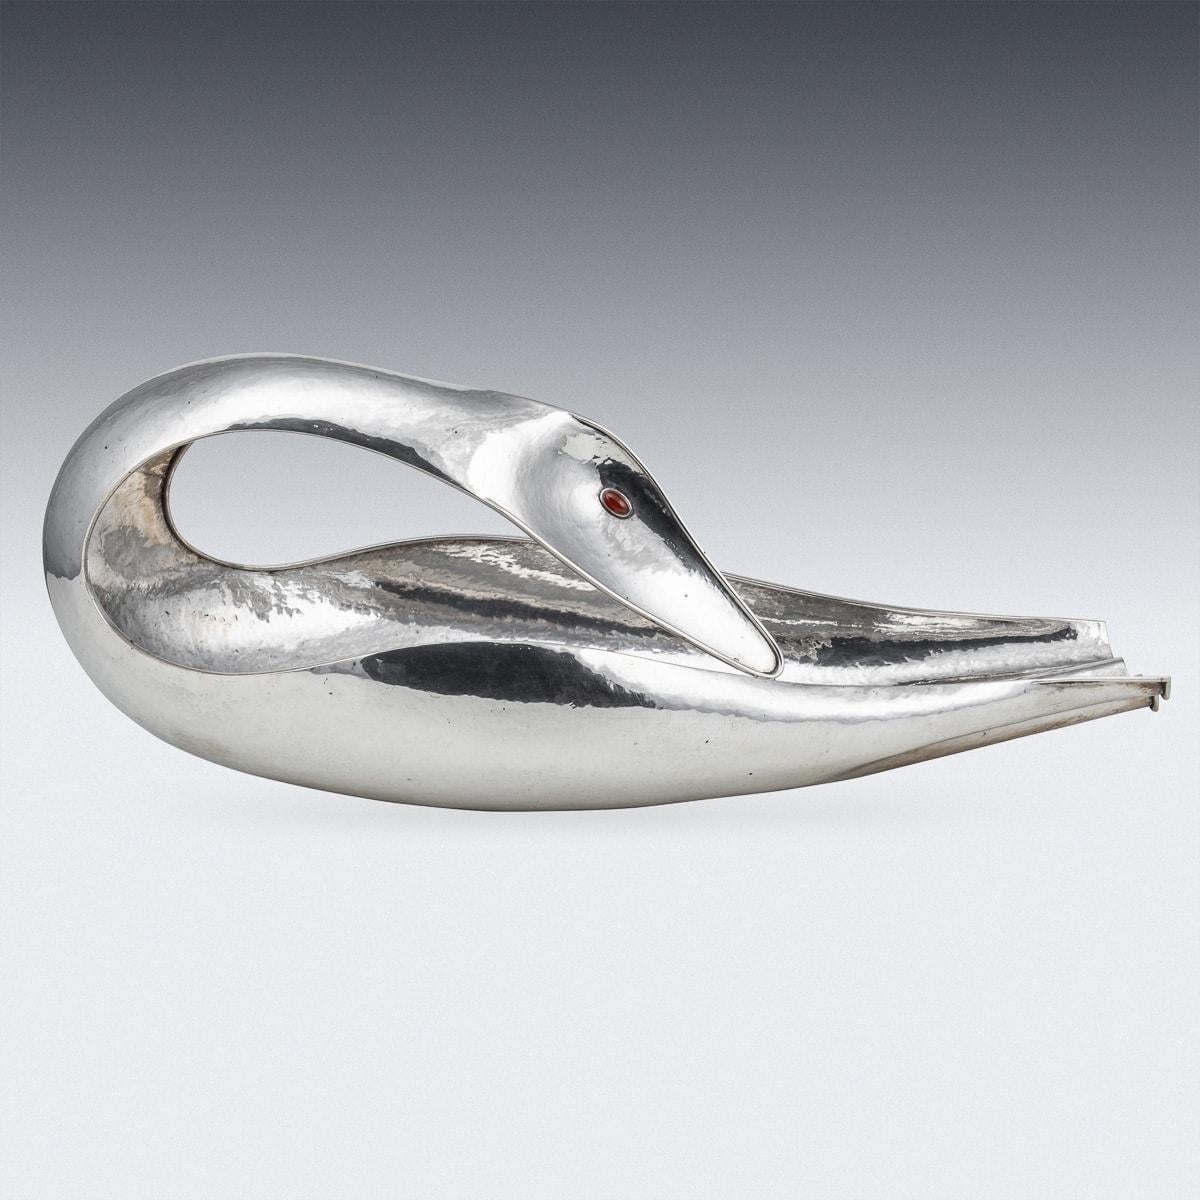 Italian Silver Baguette Tray In The Form Of A Swan, By Finzi c.1970 In Good Condition For Sale In Royal Tunbridge Wells, Kent